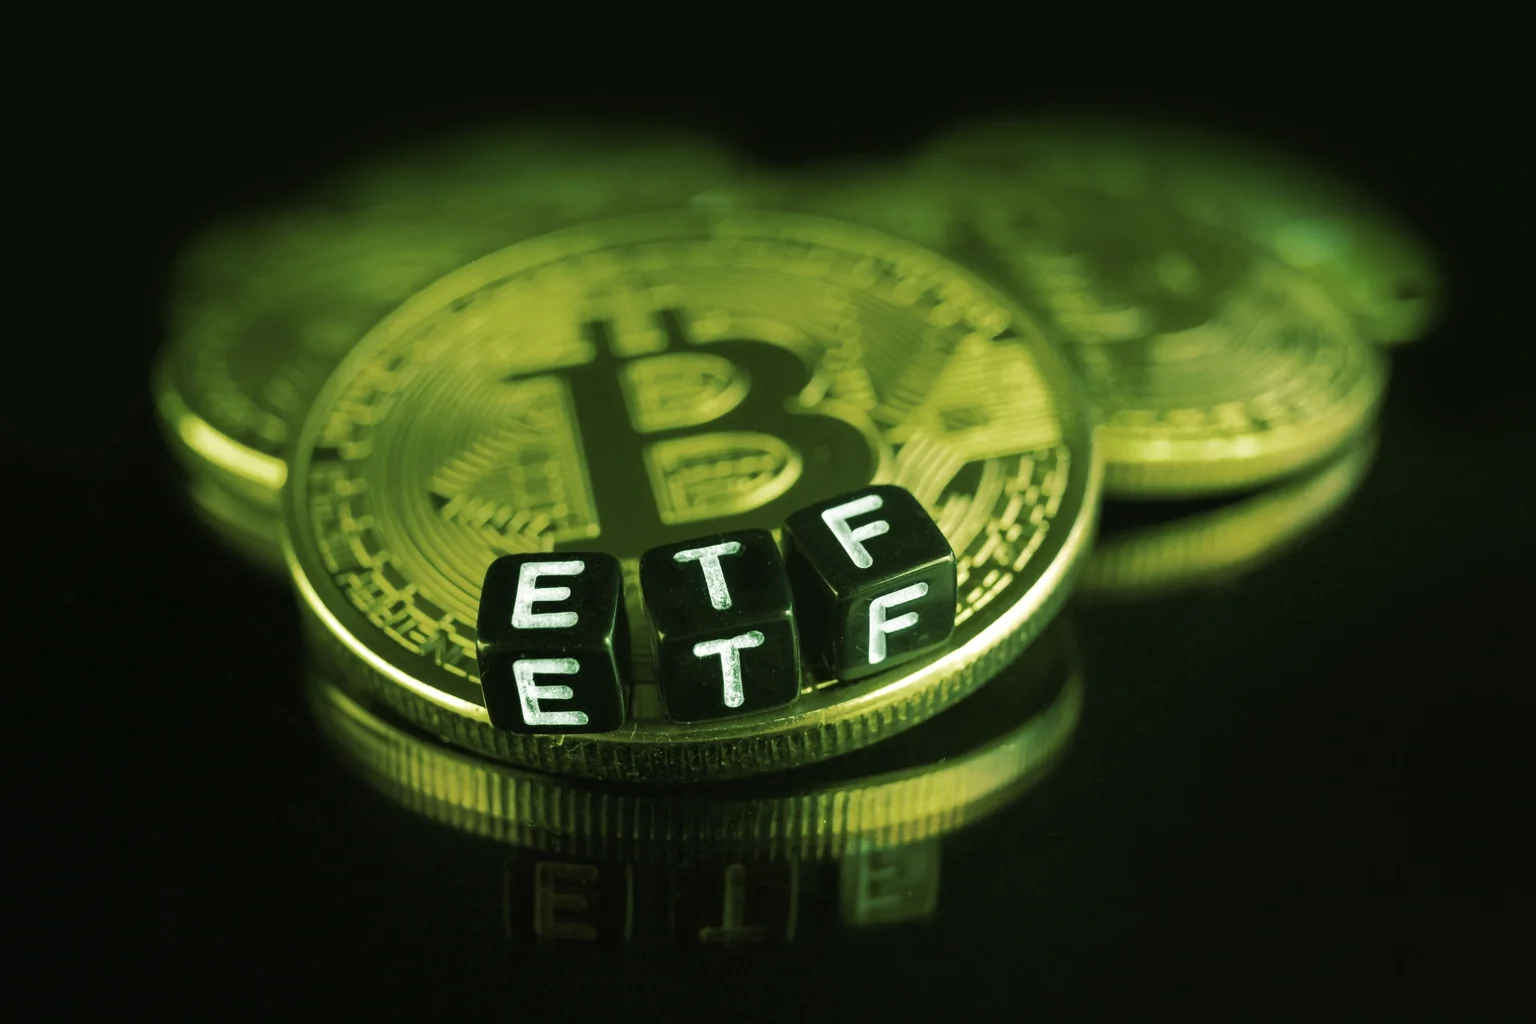 American investors are still waiting for a Bitcoin ETF. Image: Shutterstock